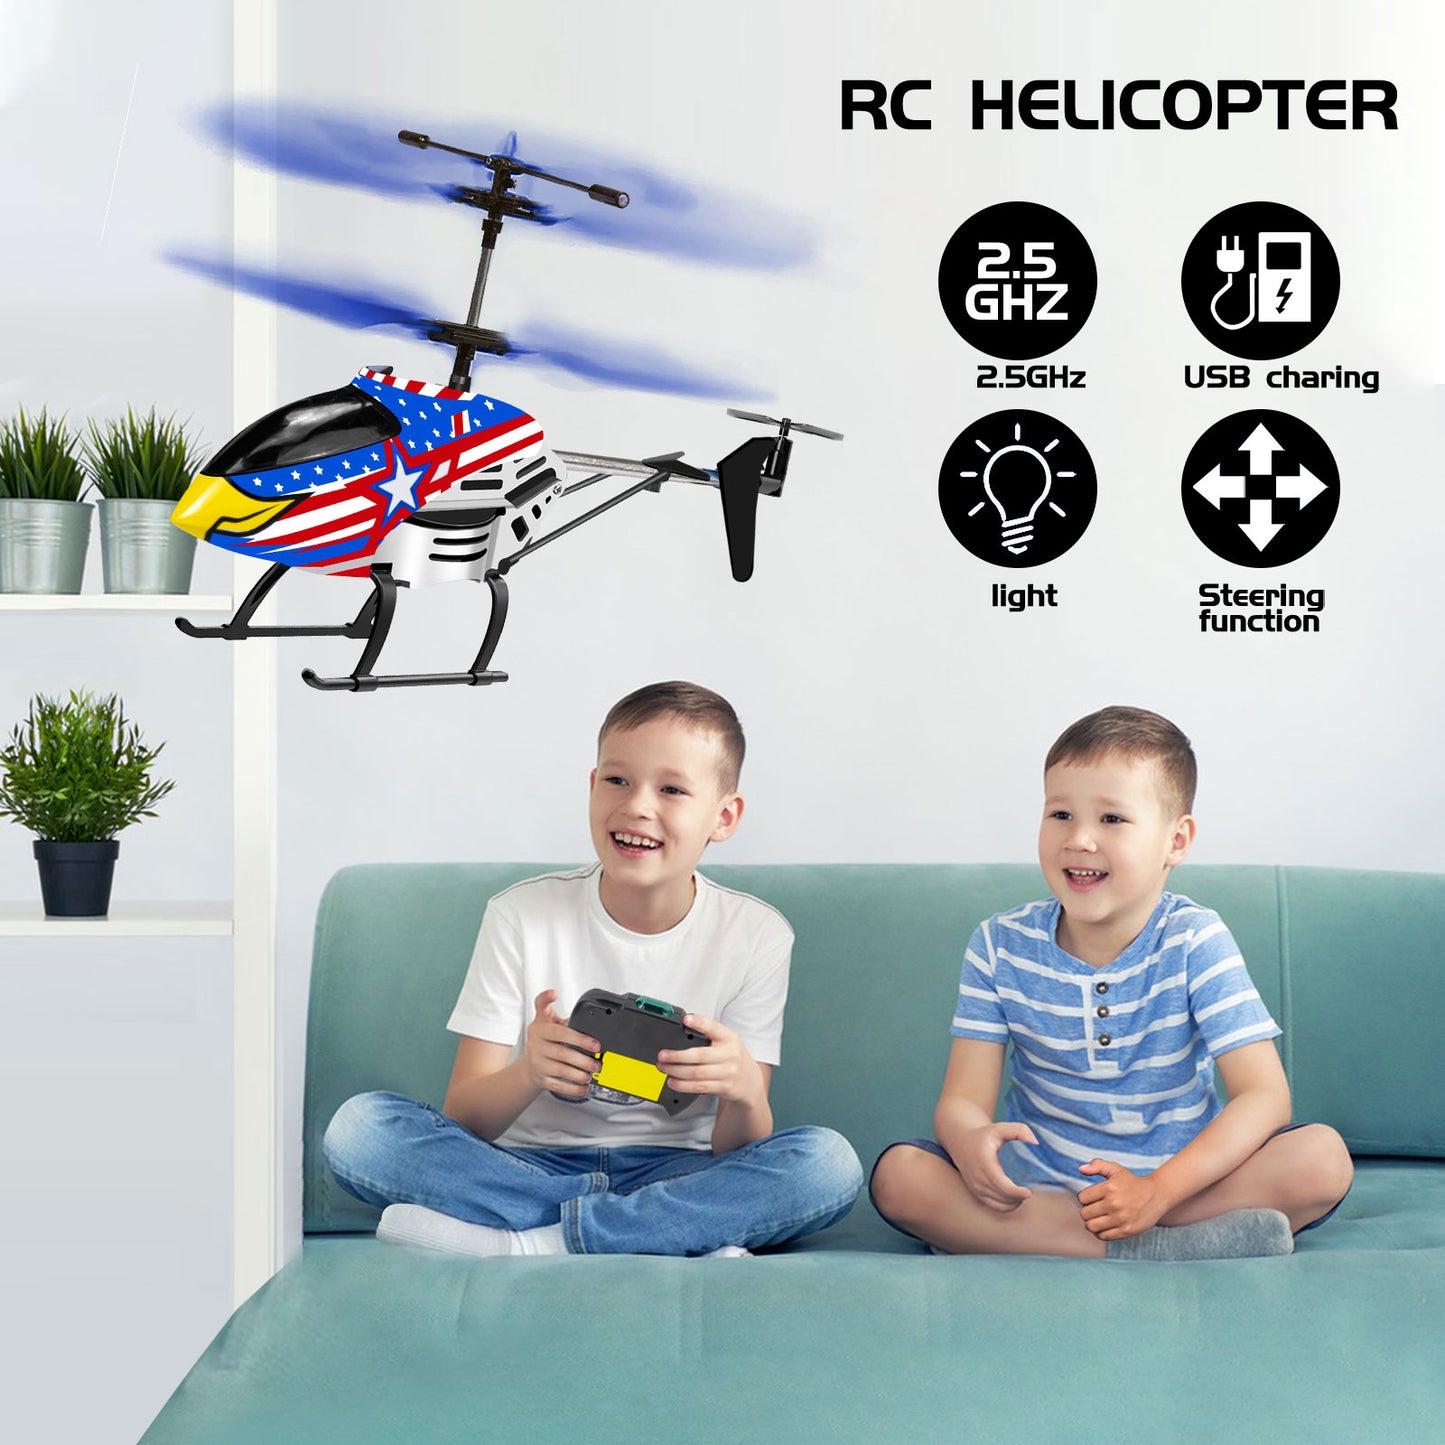 "YongnKids Remote Control Helicopter for Kids| Rc Helicopter Toys w/t LED Lights, 3.5 Channel, Gyro Stabilizer, Altitude Hold, 2.4GHz Helicopter Toys for Beginner Boys Girls Indoor- Eagle "